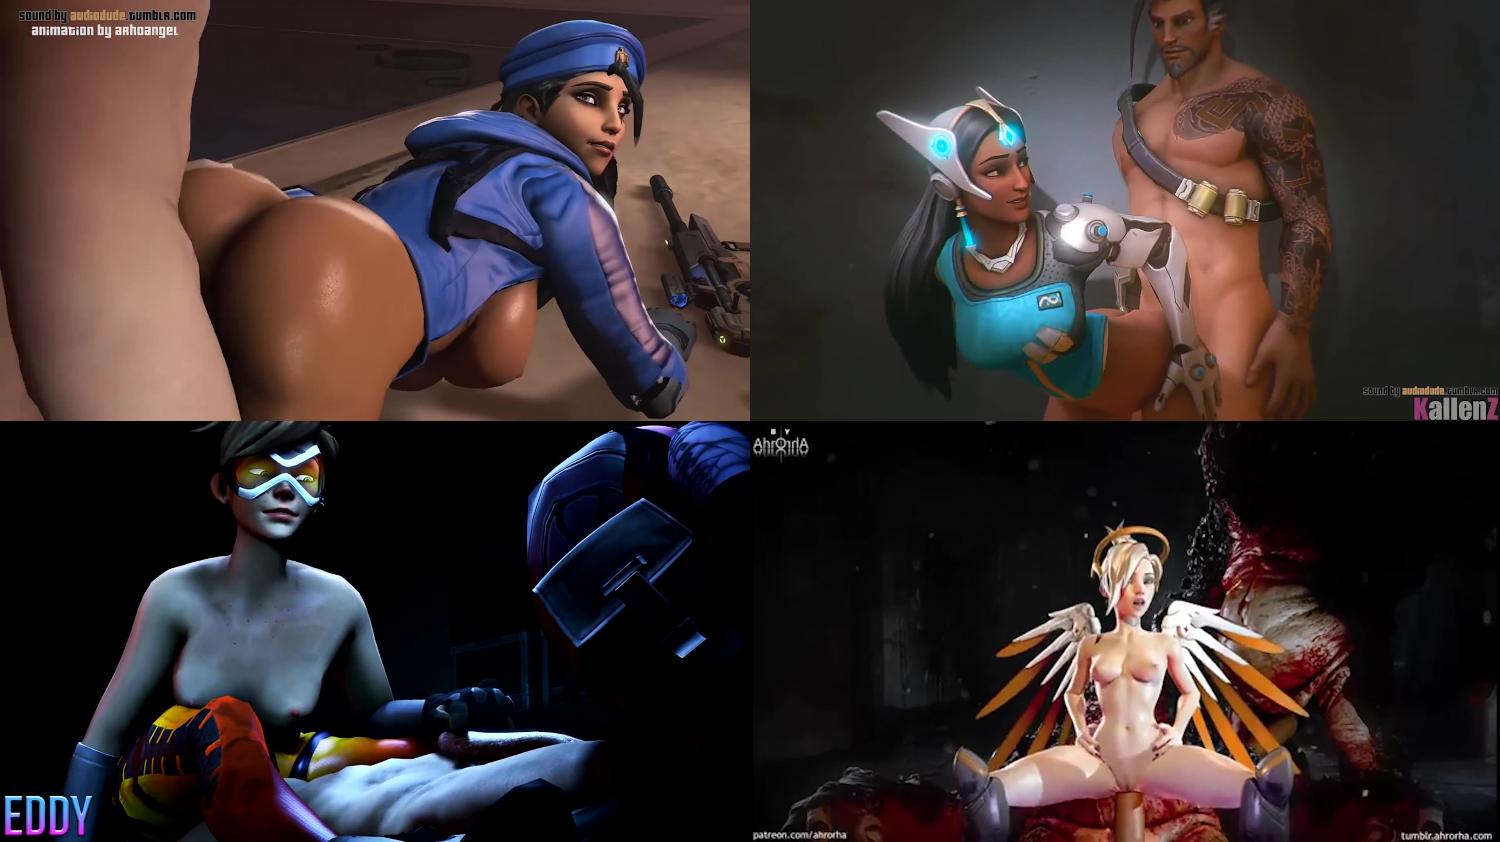 Best Animated Porn Compilation – Overwatch Edition